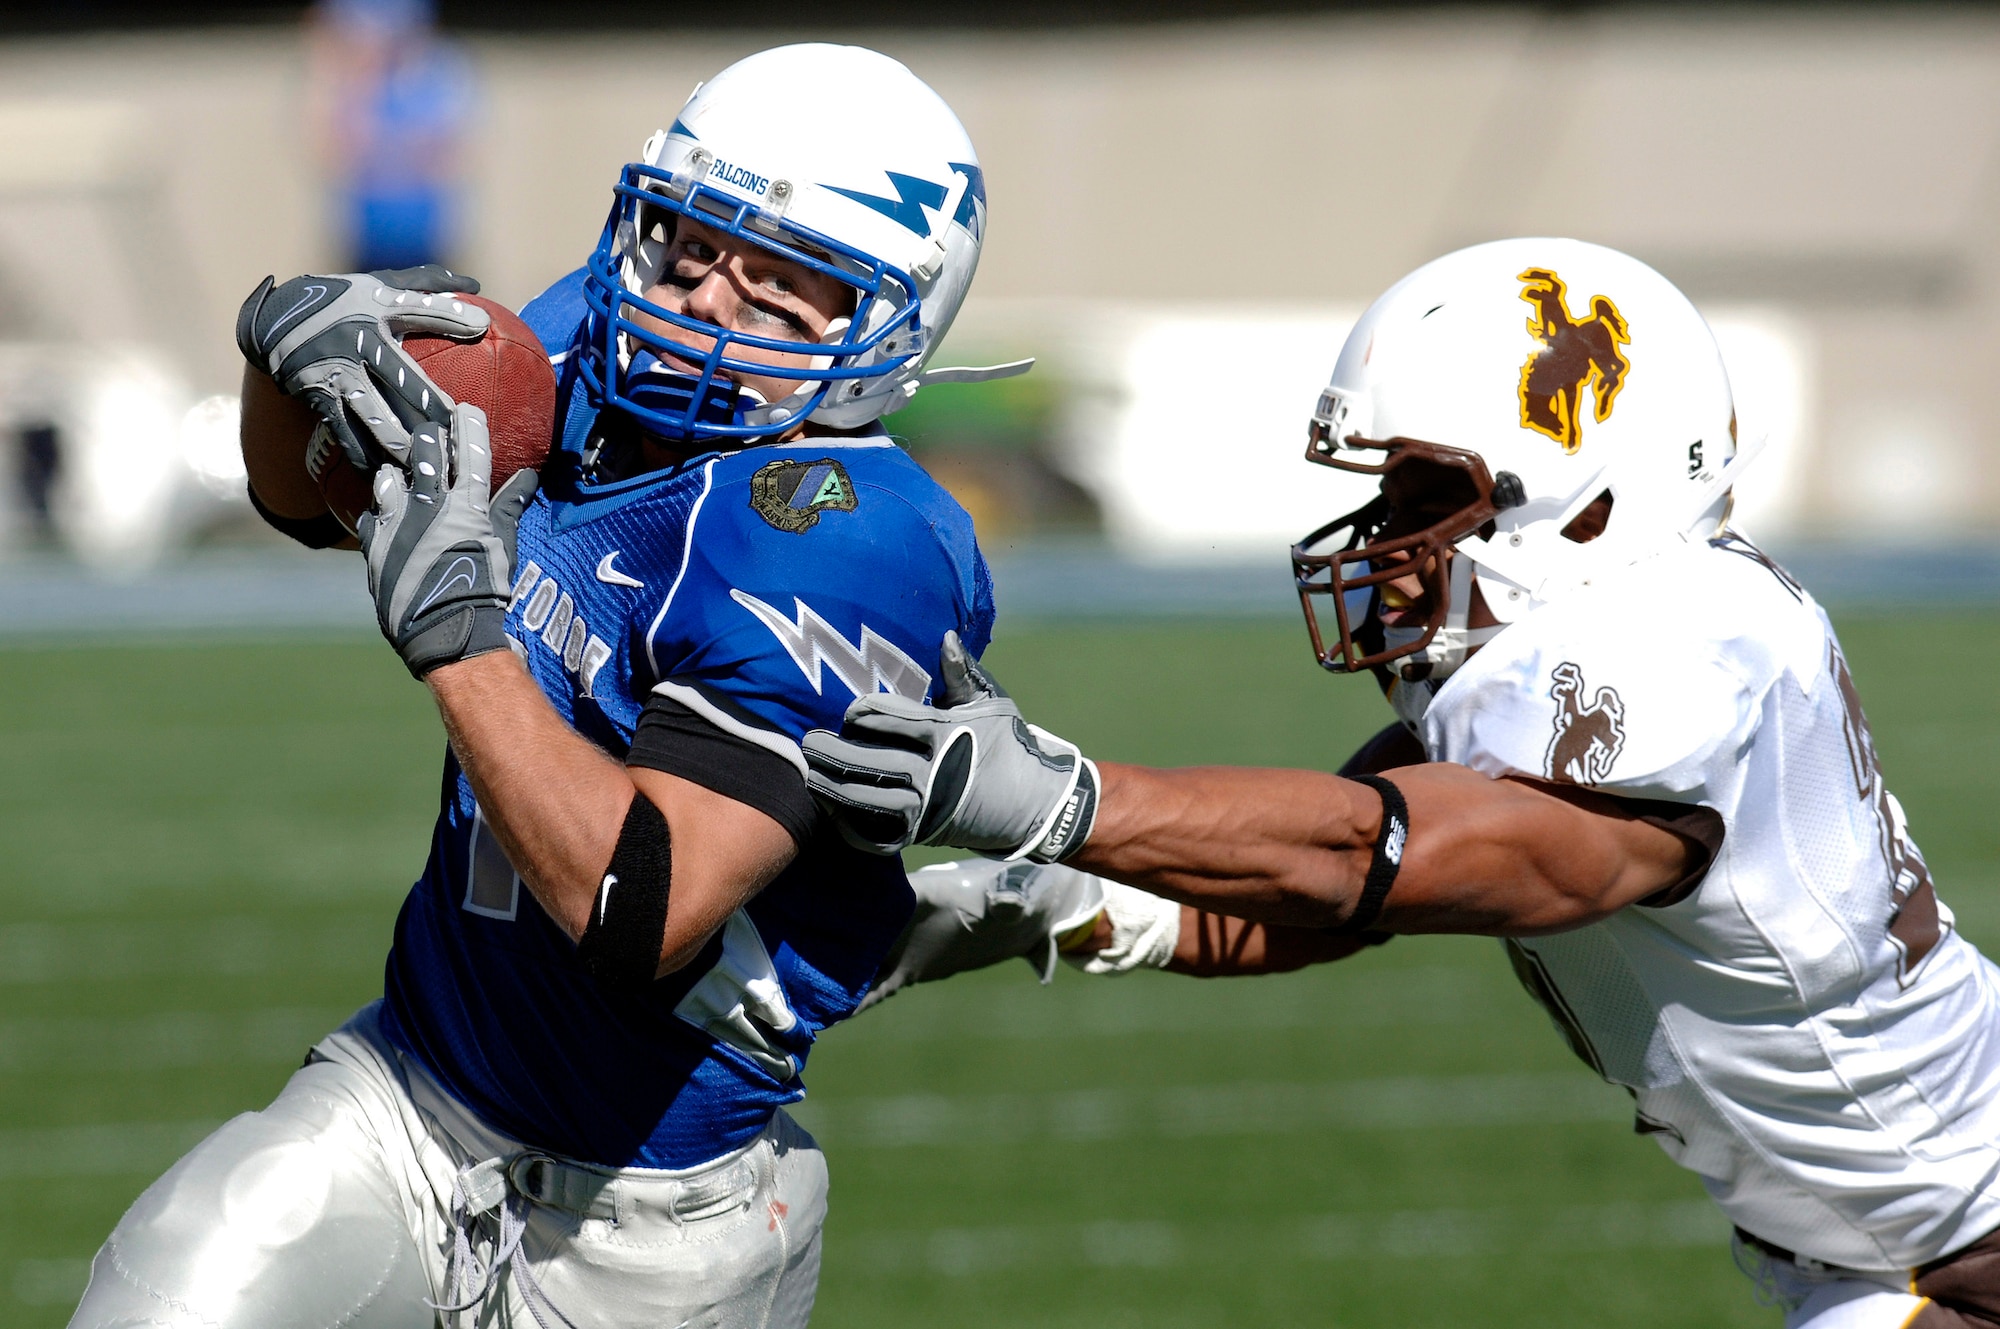 U.S. Air Force Academy Falcons z-back Chad Hall eludes a Wyoming defender during Air Force's 20-12 win Oct. 20 at Falcon Stadium in Colorado. Hall rushed for a game-high 167 yards to up his career total to 1,878, the eighth highest in Academy history. (U.S. Air Force photo/Mike Kaplan) 
